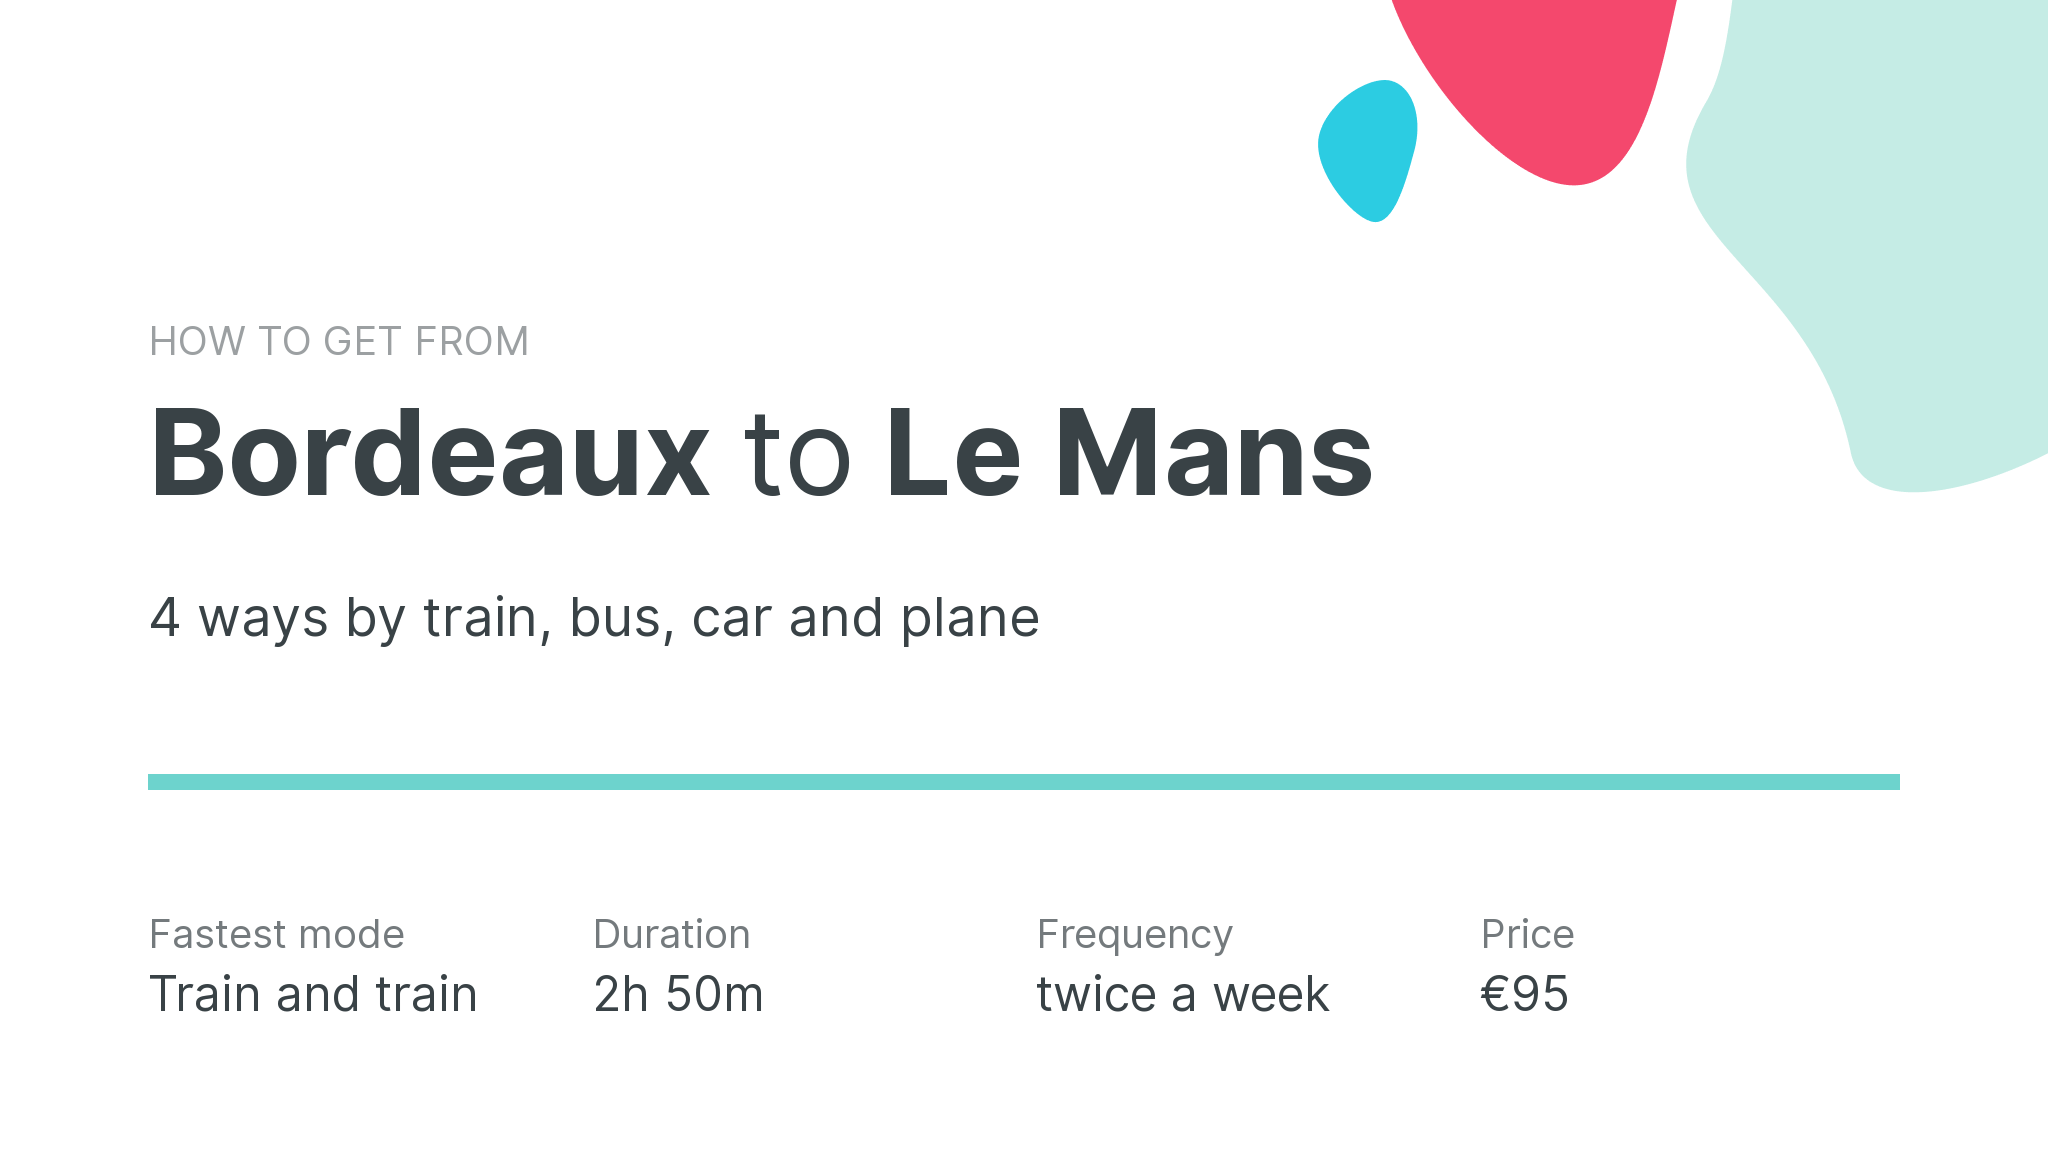 How do I get from Bordeaux to Le Mans